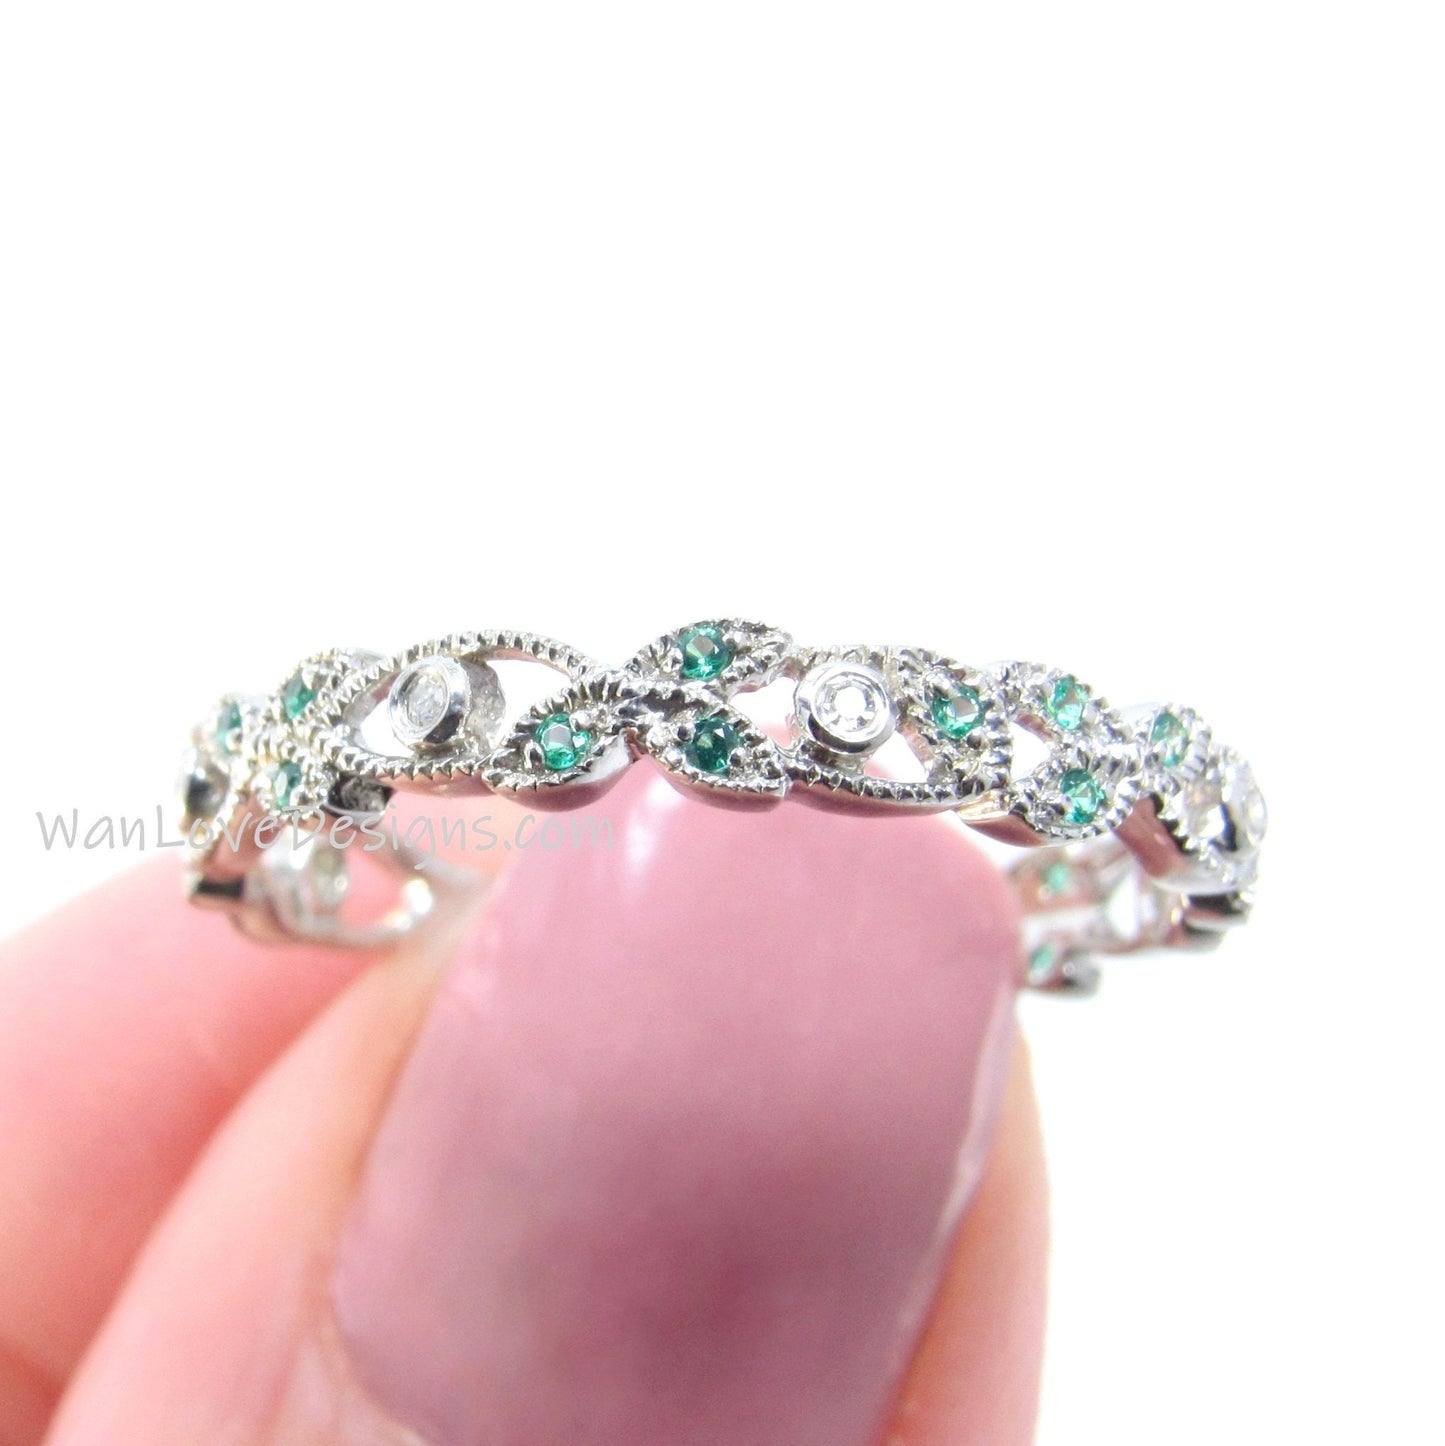 Vintage Green Spinel Diamond wedding band Art deco filigree band Stacking matching band unique Milgrain anniversary promise ring -Ready